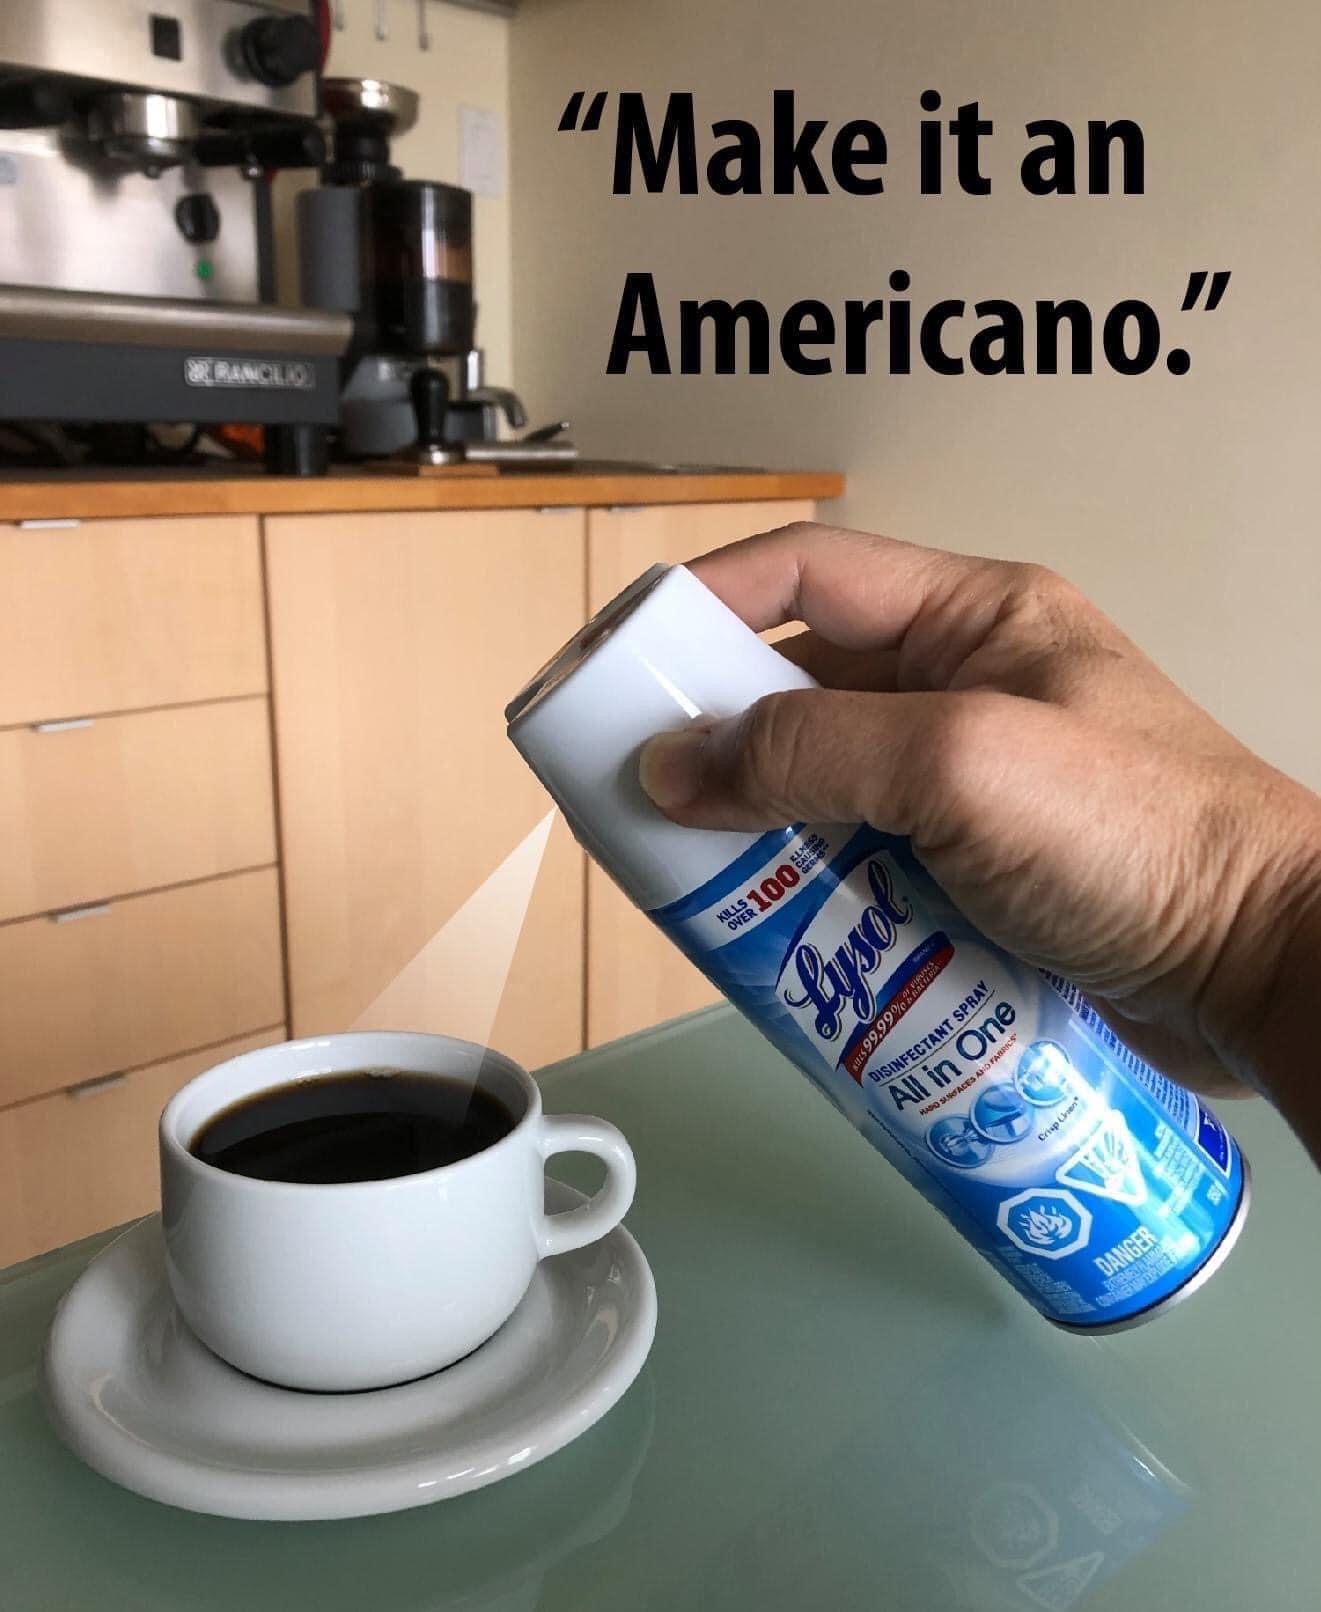 cup - "Make it an Americano." Months 100 Lysol es 99.99% Disinfectant Spray All in One Asosaces Faro Crispurn